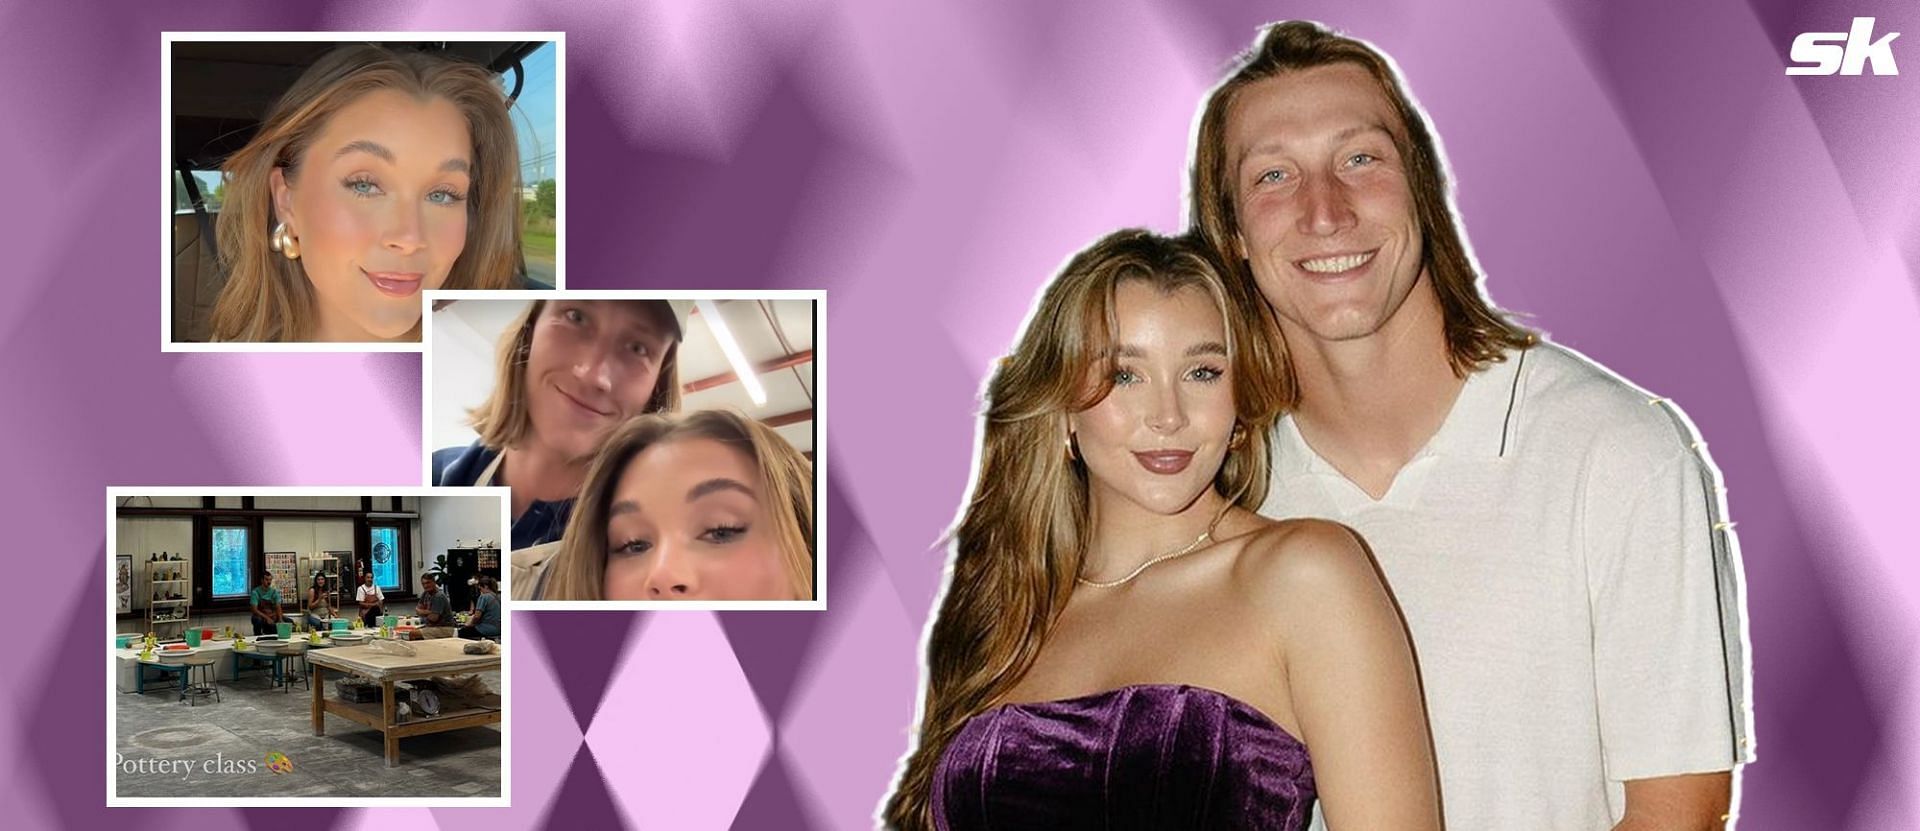 IN PHOTOS: Trevor Lawrence and wife Marissa show off creative talent during 